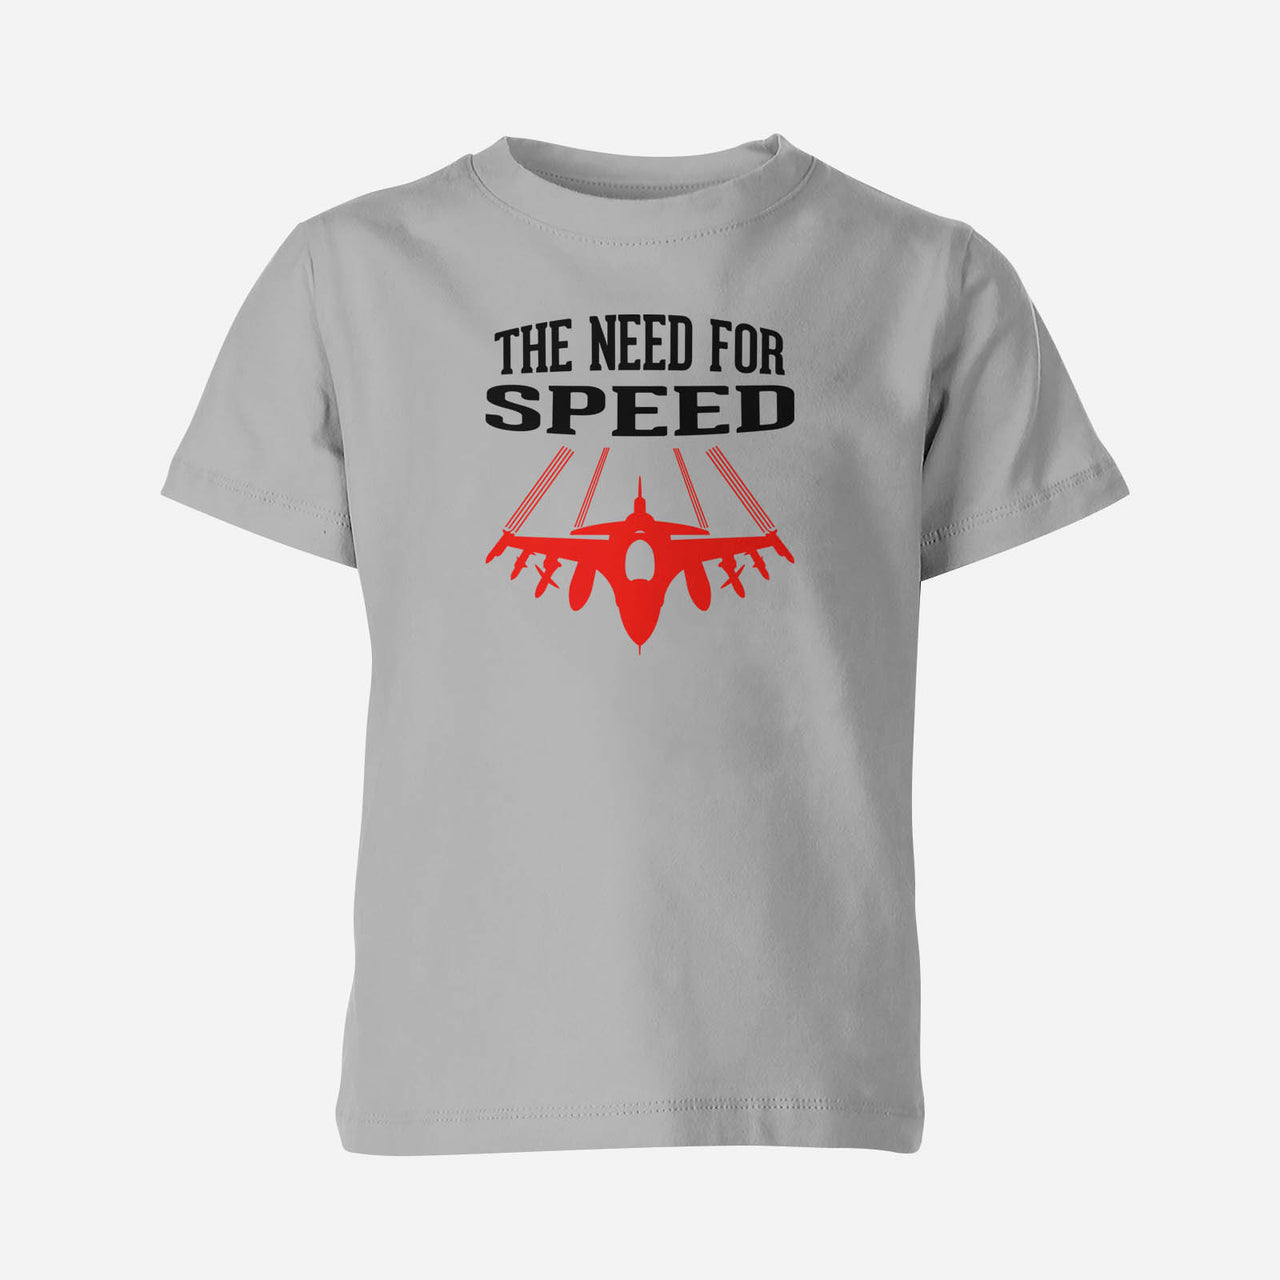 The Need For Speed Designed Children T-Shirts